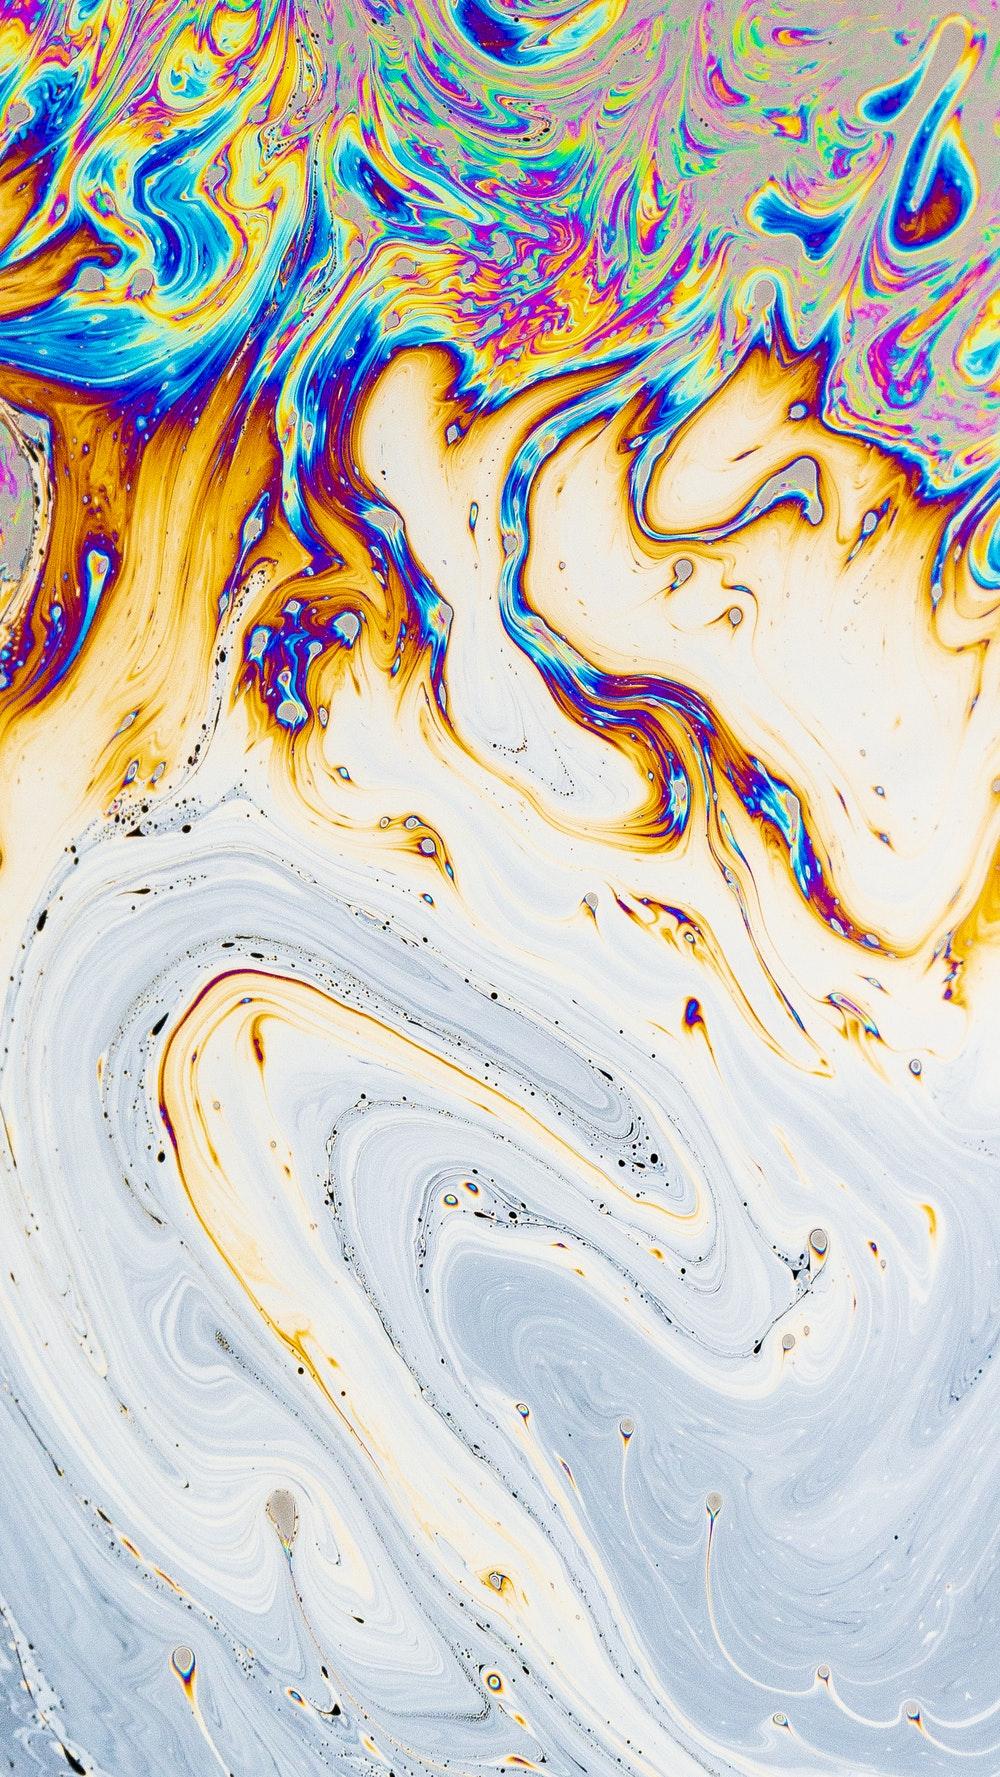 Liquid Picture [HD]. Download Free Image